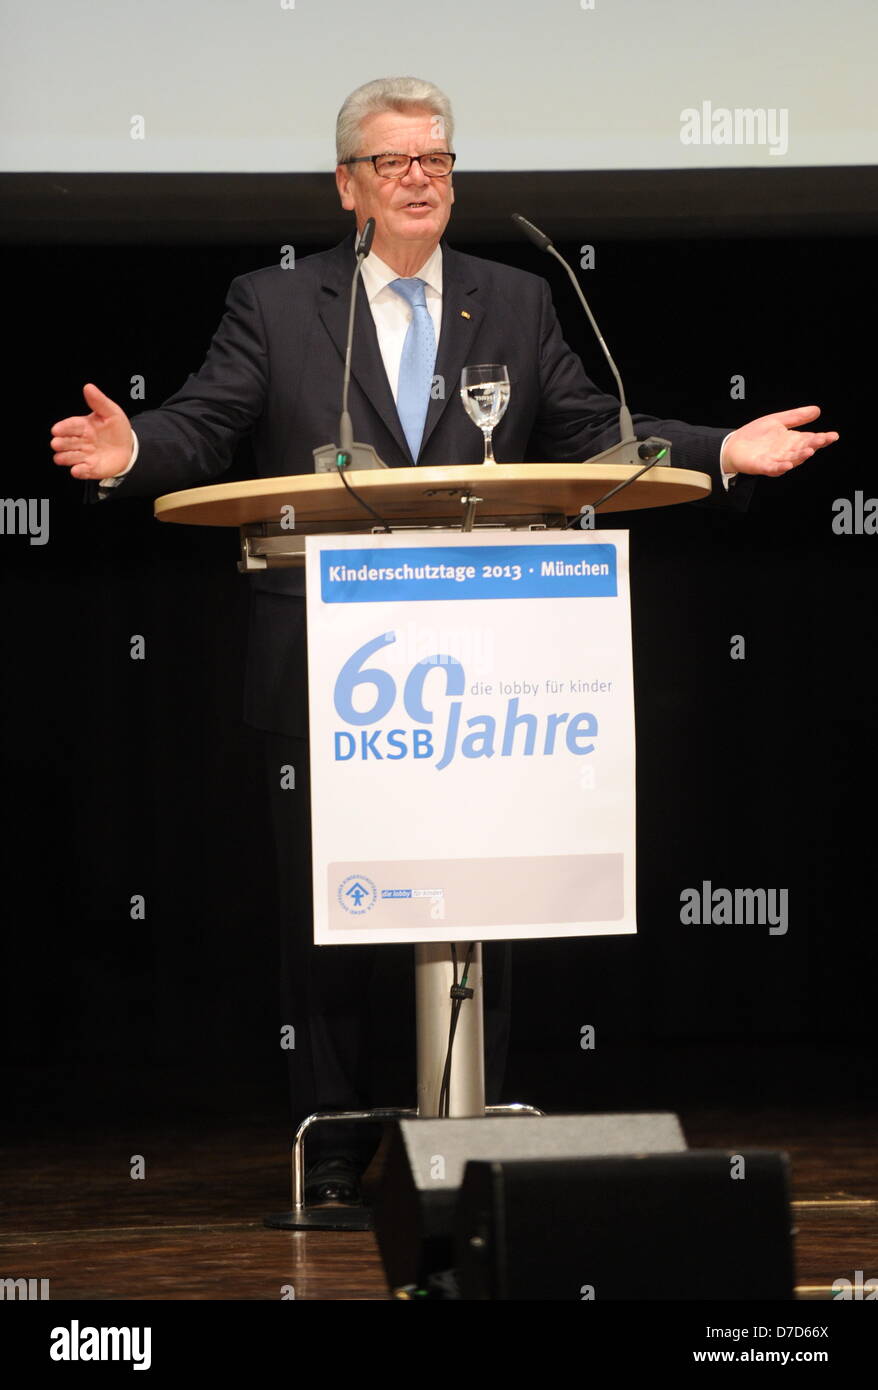 A HANDOUT picture dated 03 May 2013 shows German President Joachim Gauck speak on the stage during the 60th anniversary of German Child Protection League (DKSB) in Munich, Germany. DKSB has more thanh 50,000 members. Photo: Deutscher Kinderschutzbund e.V./Tobias Hase Stock Photo